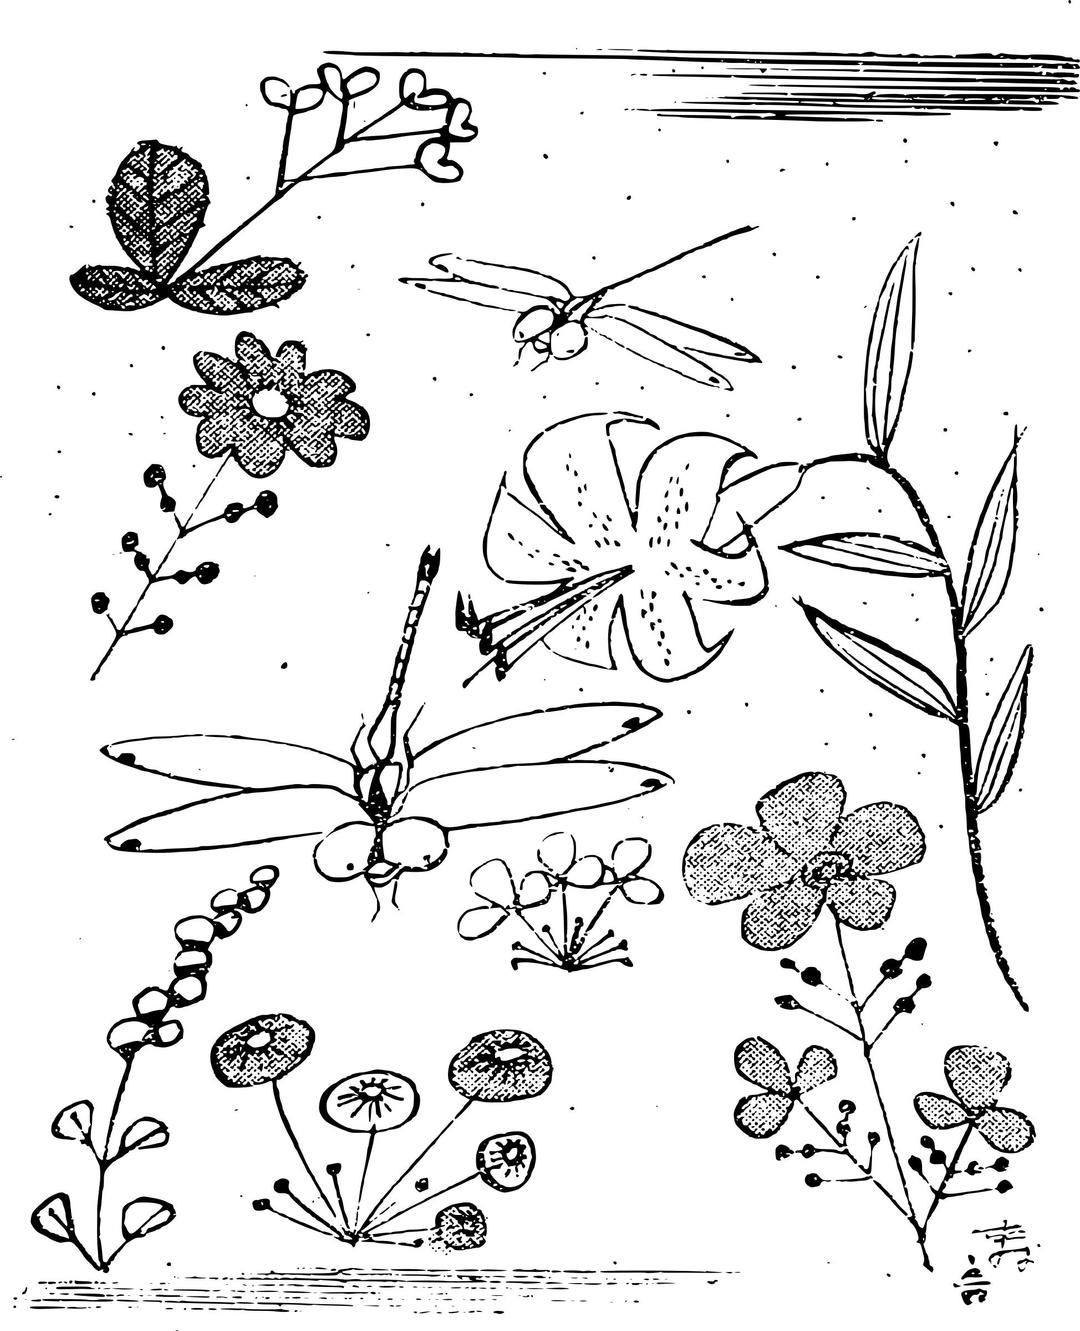 Dragonflies and Flowers png transparent